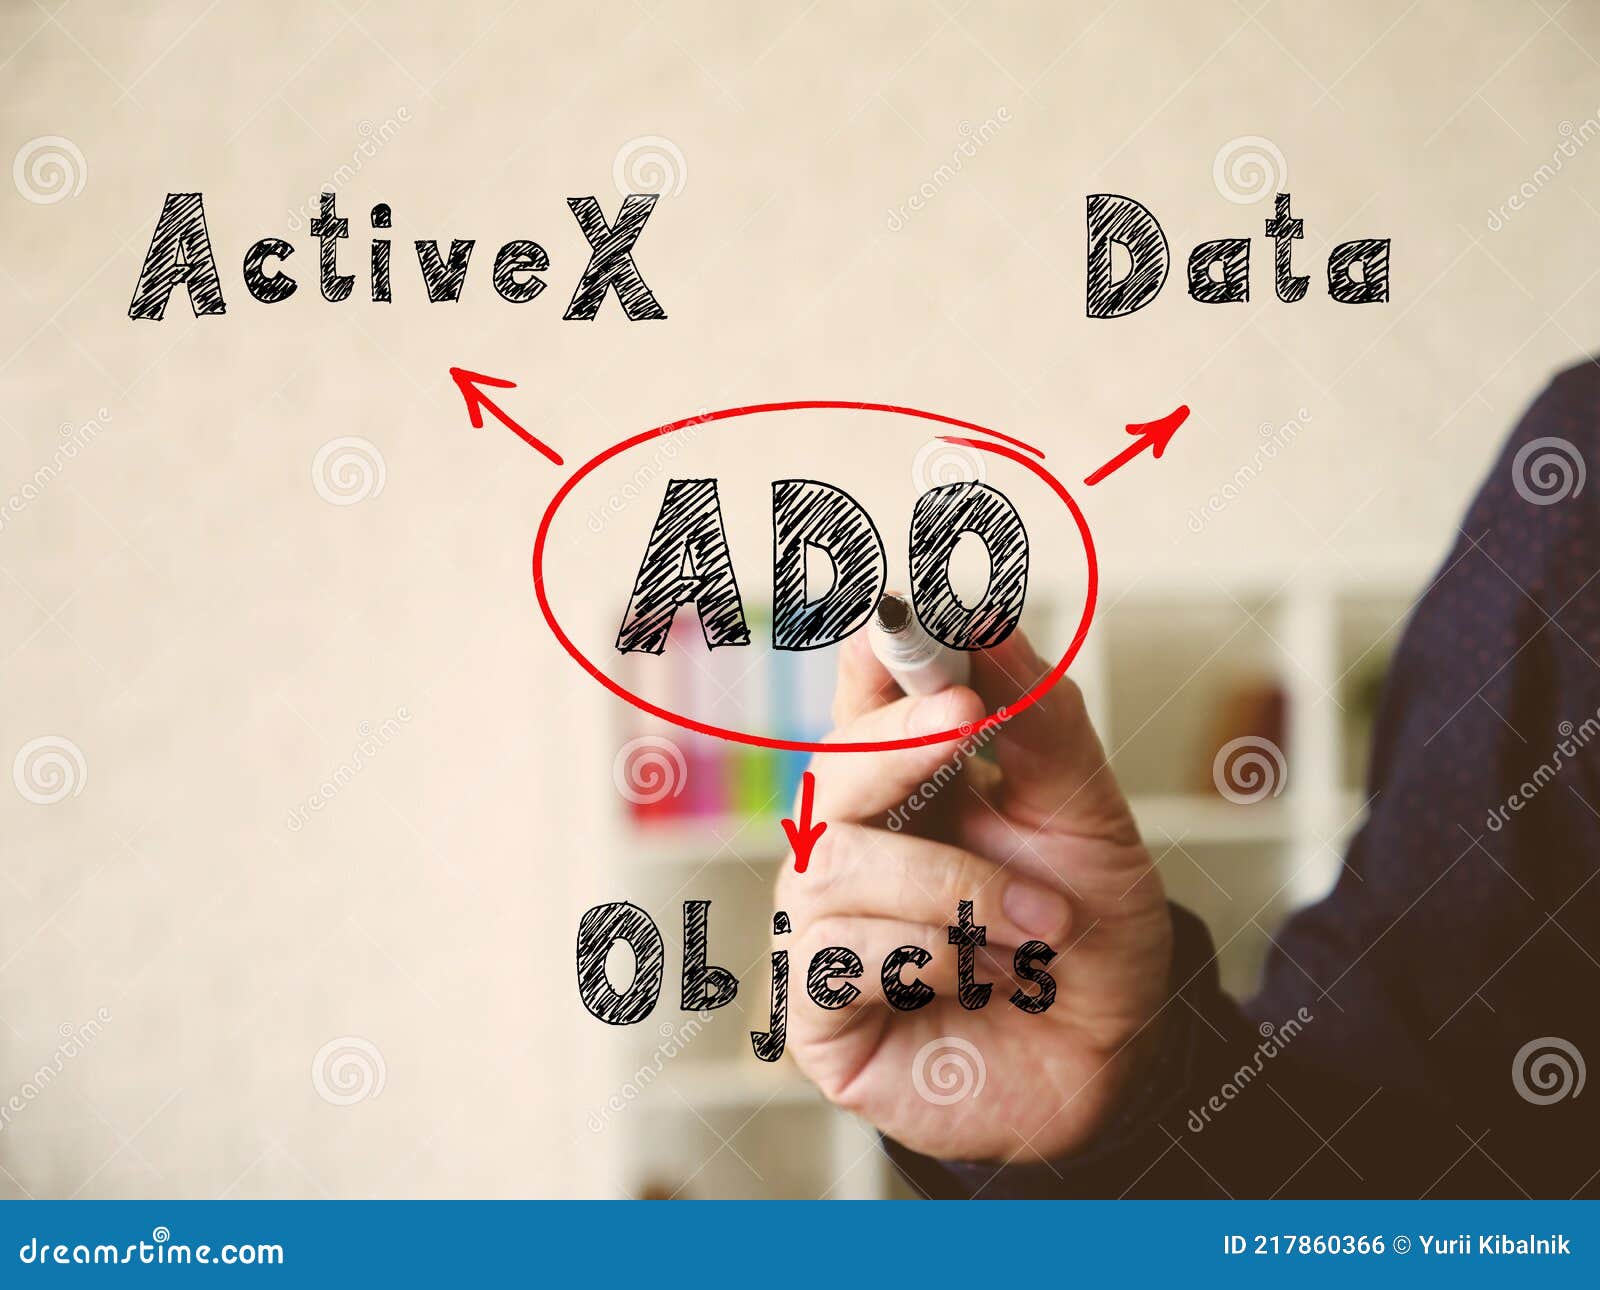 ado activex data objects inscription. interior of modern business office on an background